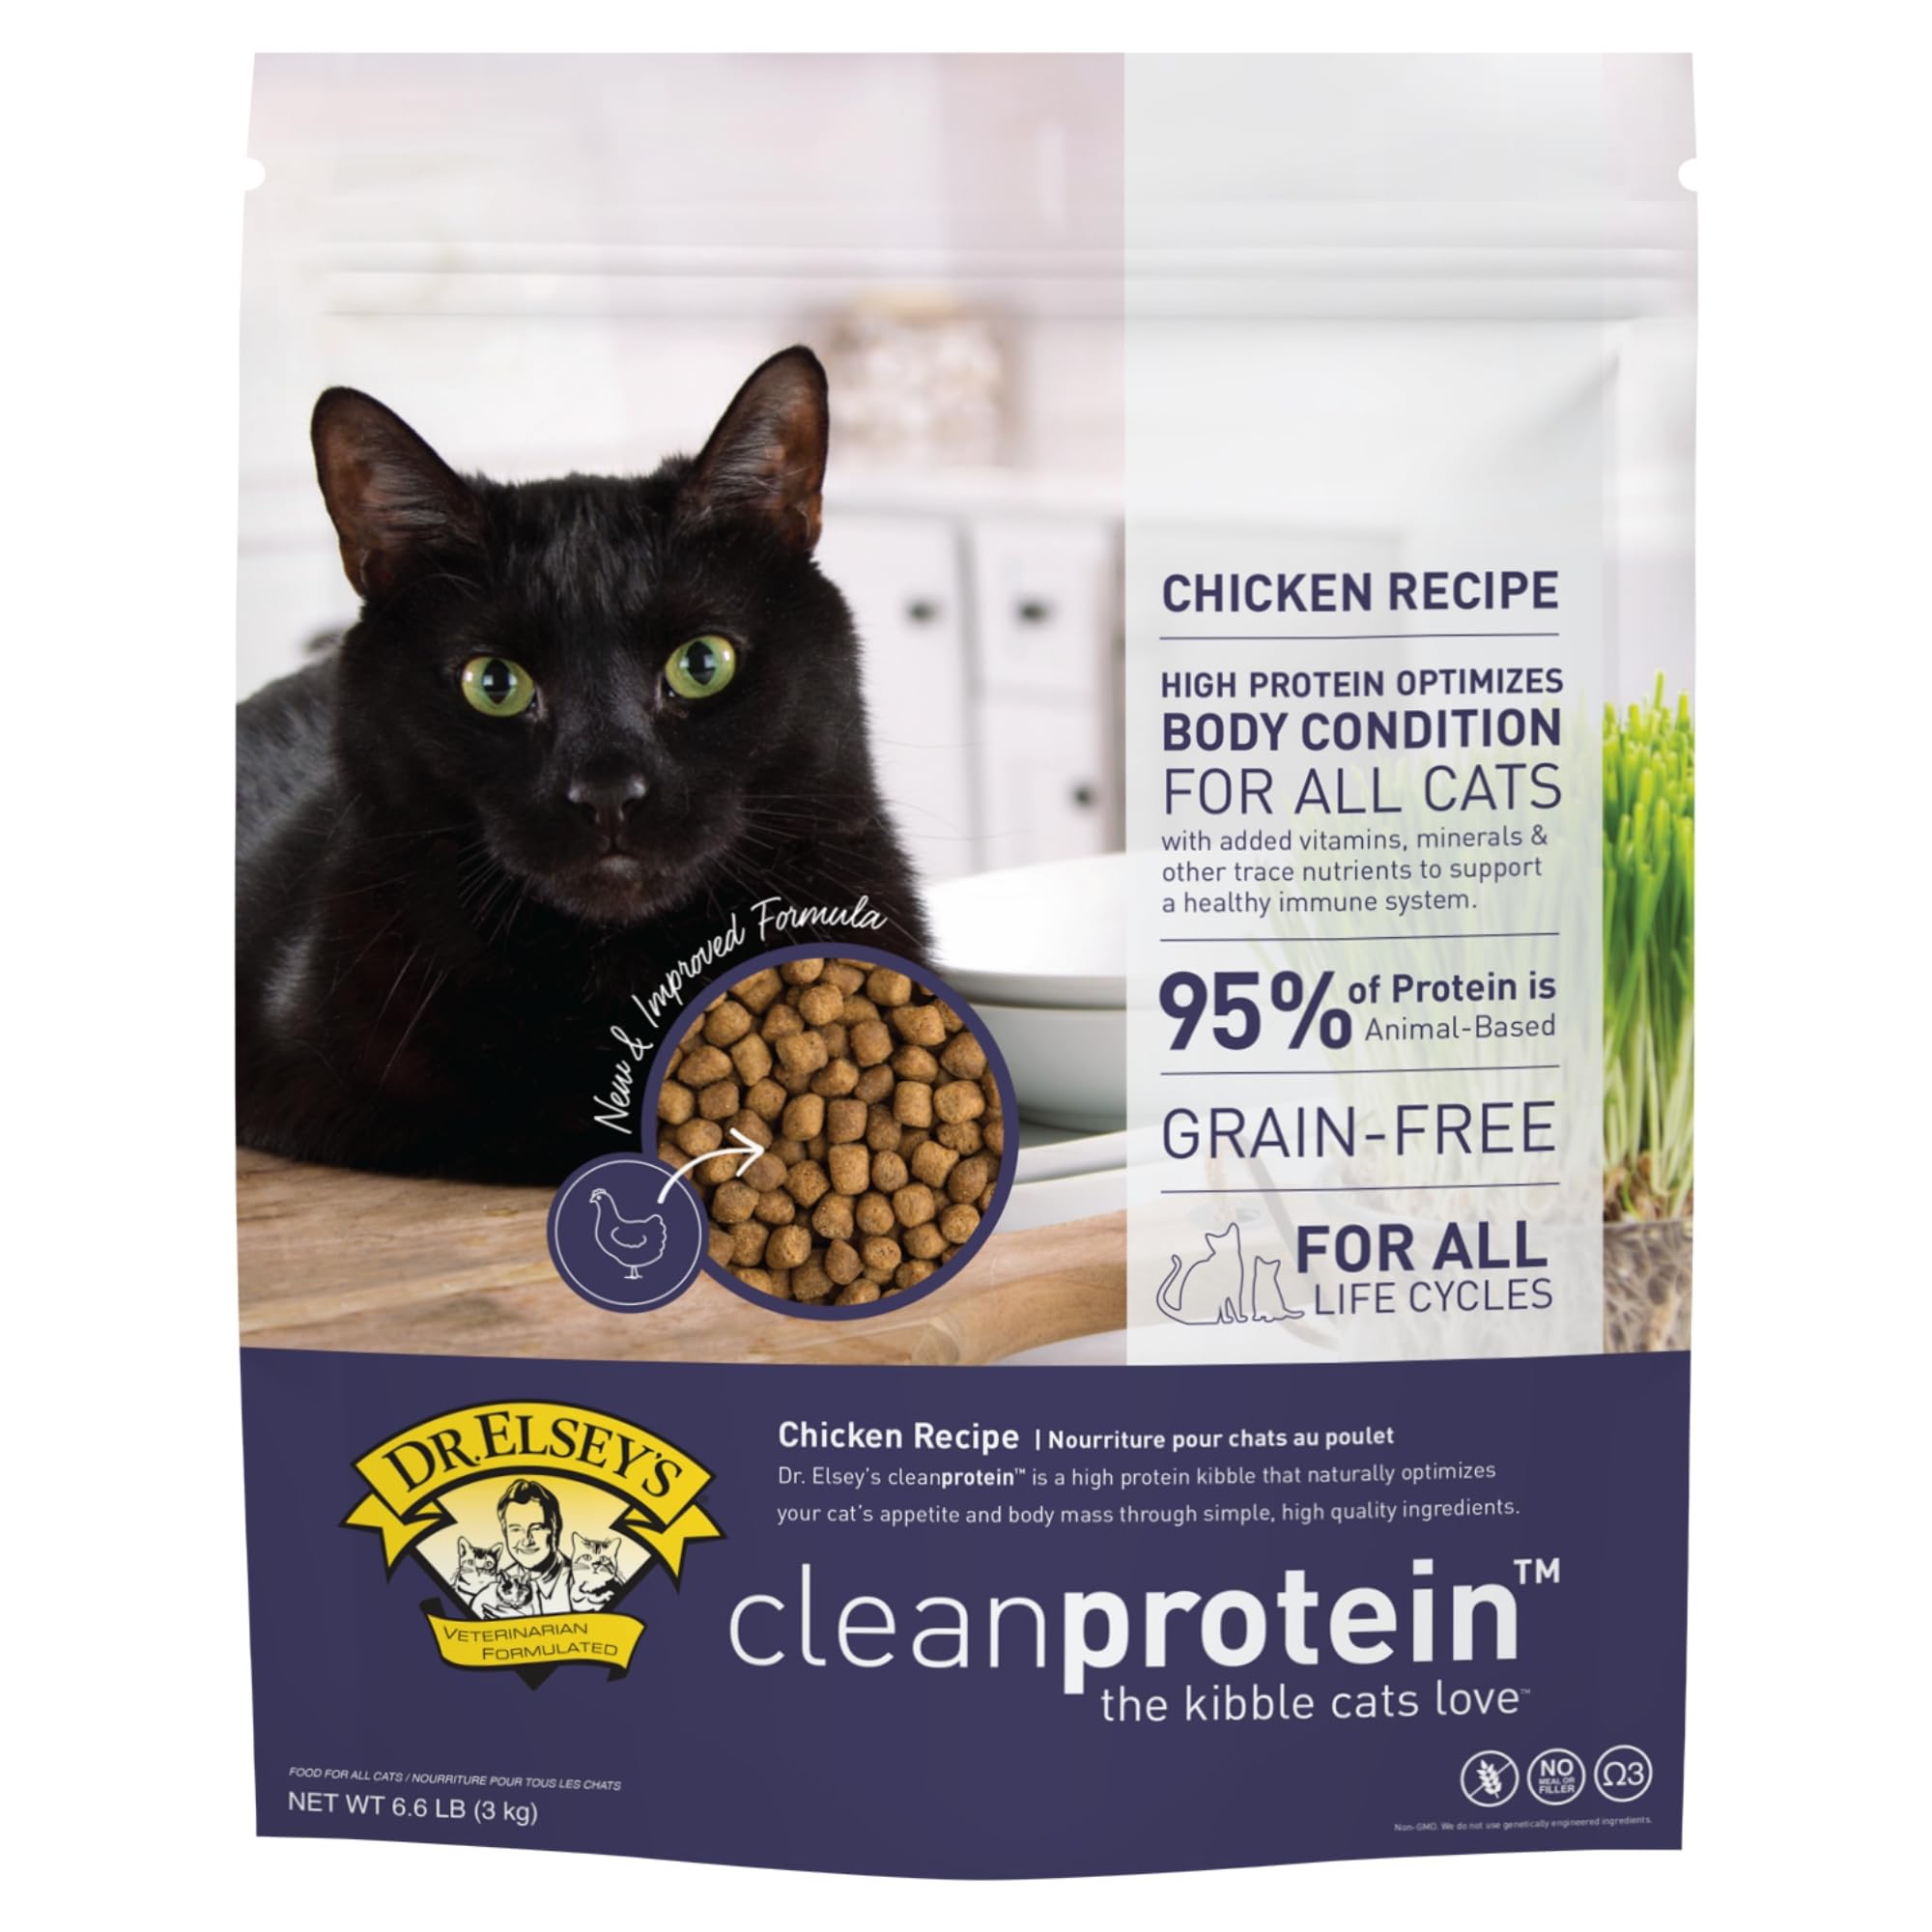 Dr. Elsey's Cleanprotein Cat Food